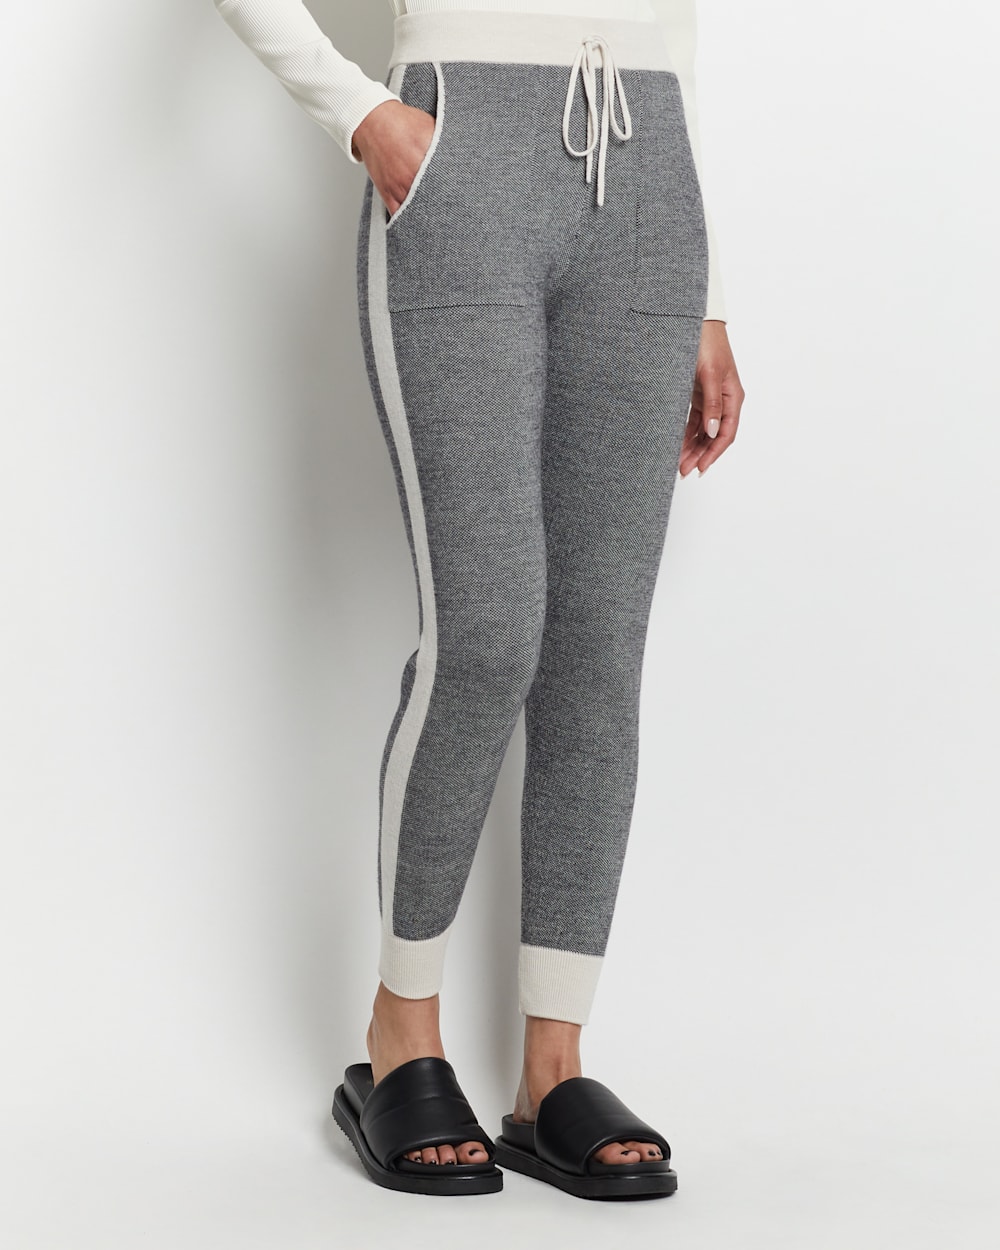 ALTERNATE VIEW OF WOMEN'S MERINO JOGGER PANTS IN CHARCOAL/IVORY image number 5